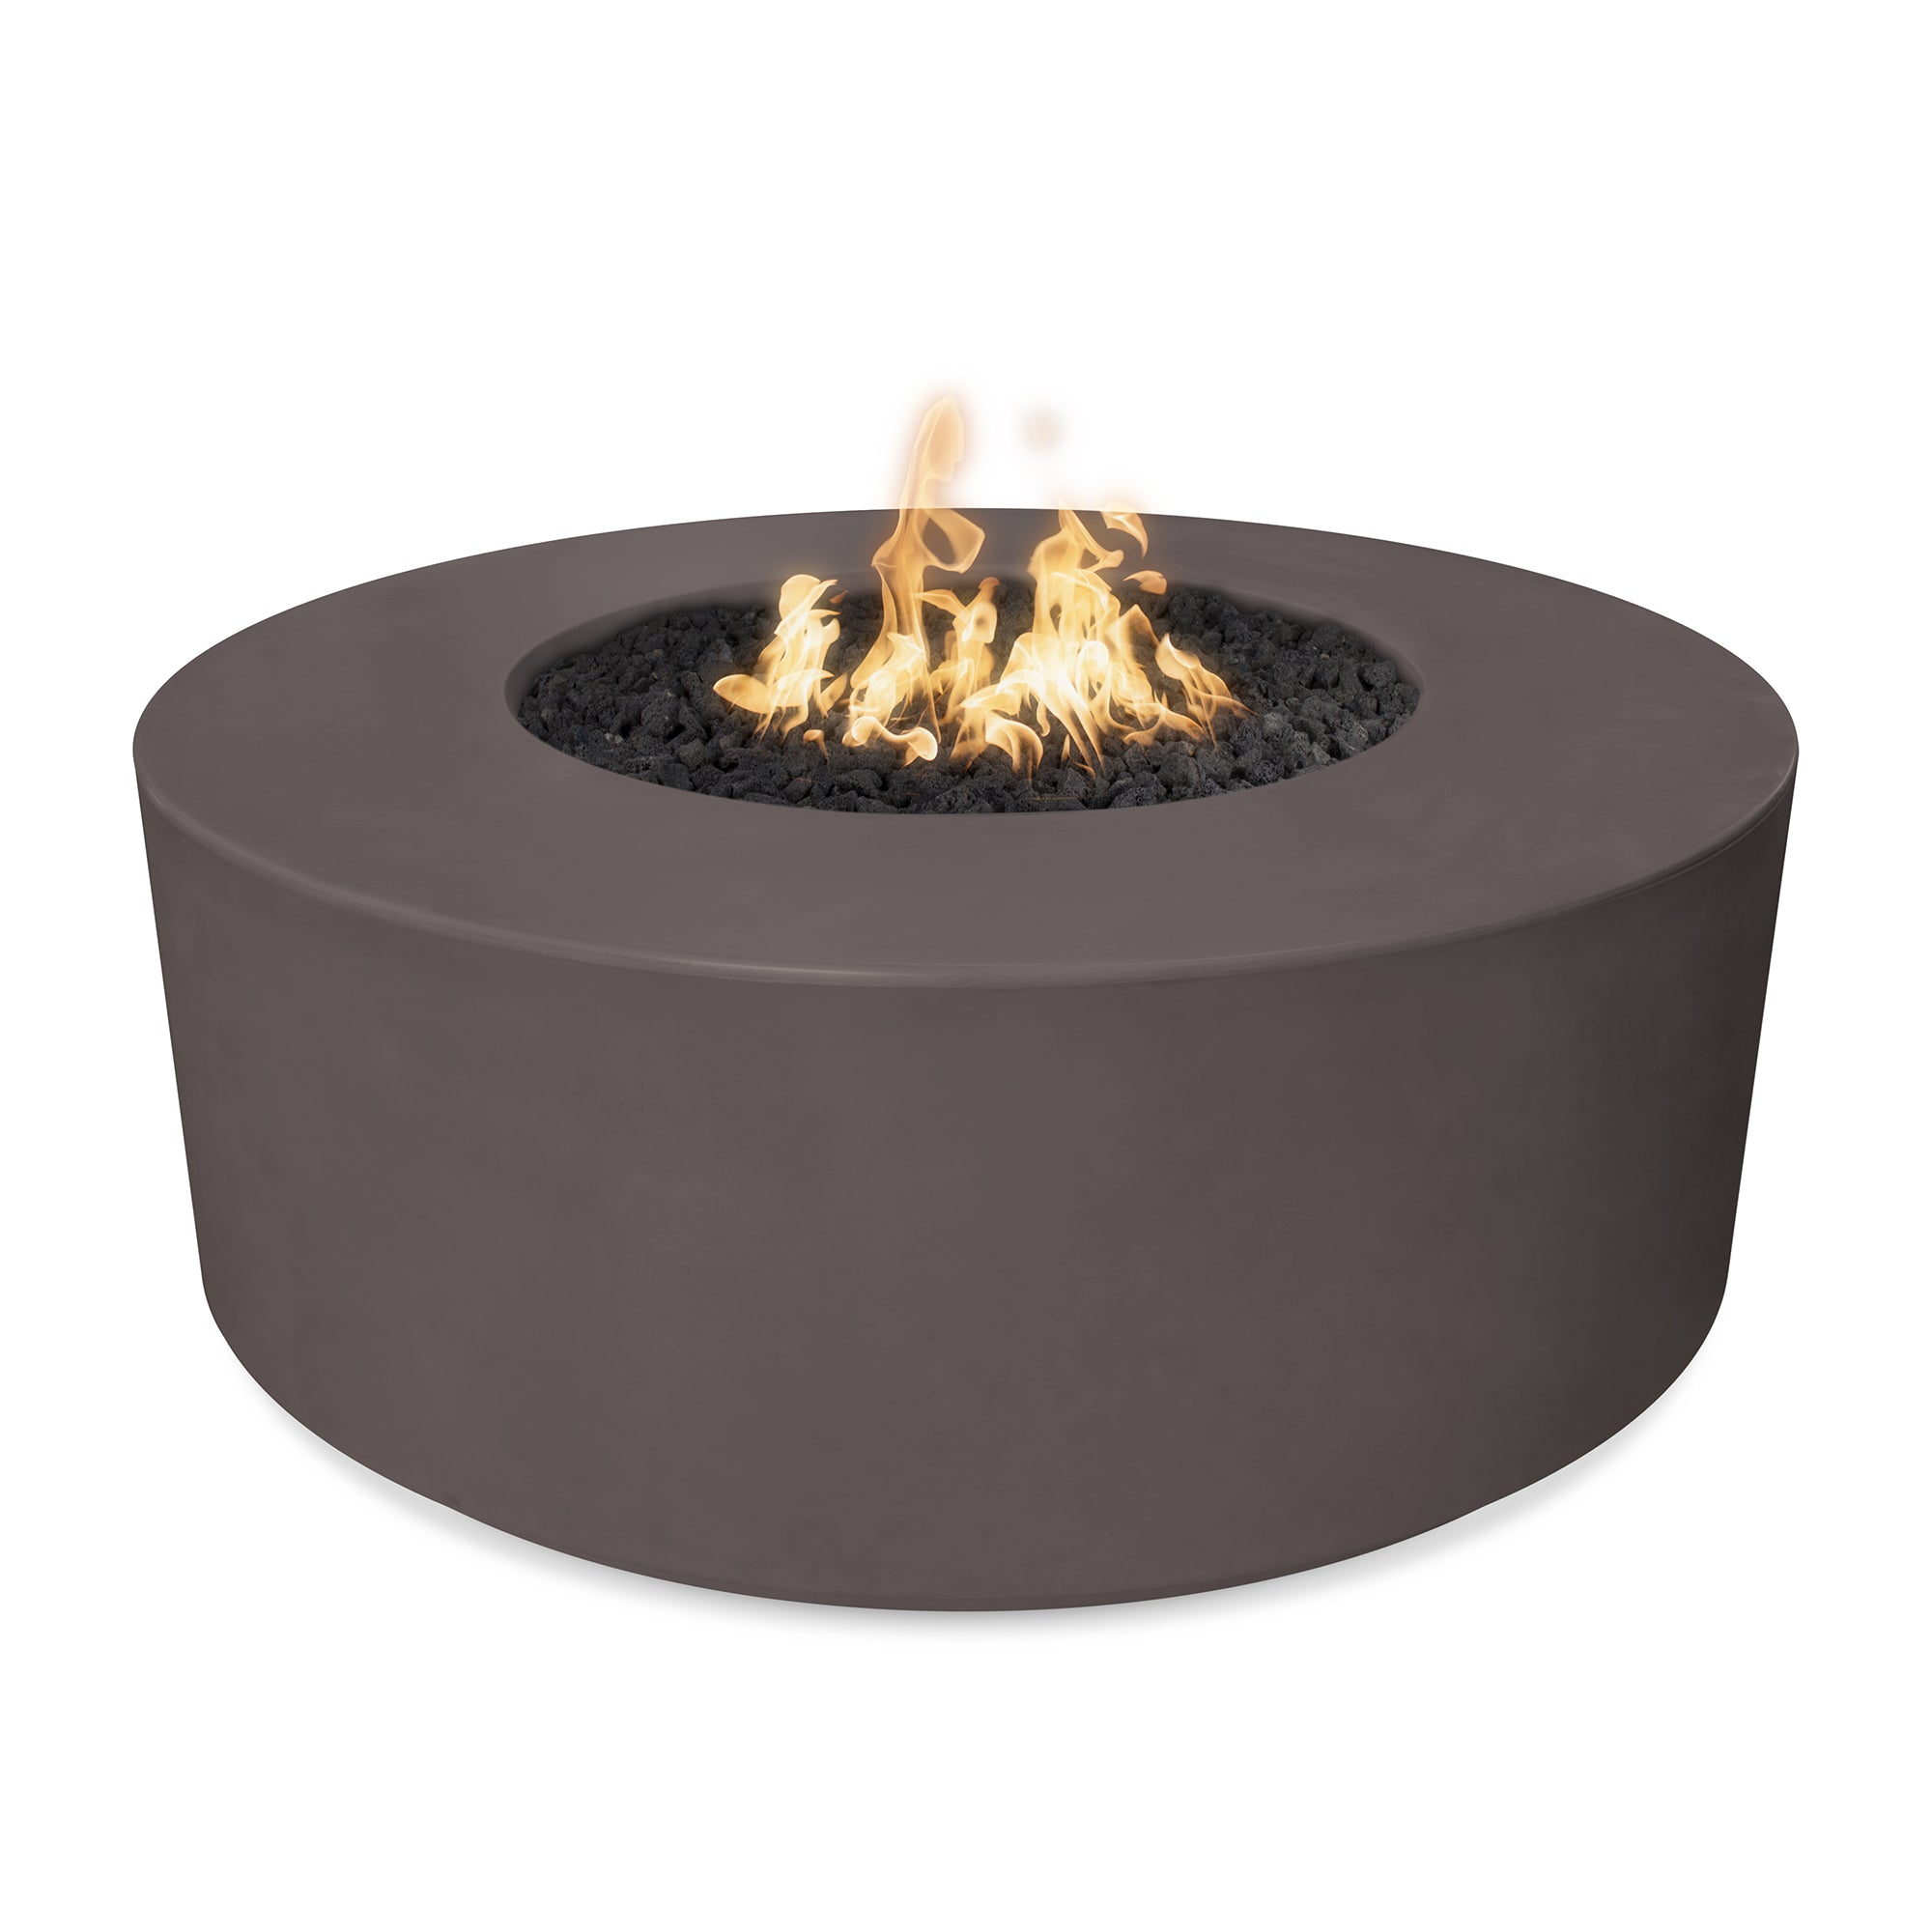 The Outdoor Plus - Florence 46 Inch Concrete Match Lit Firepit - OPT-FL46